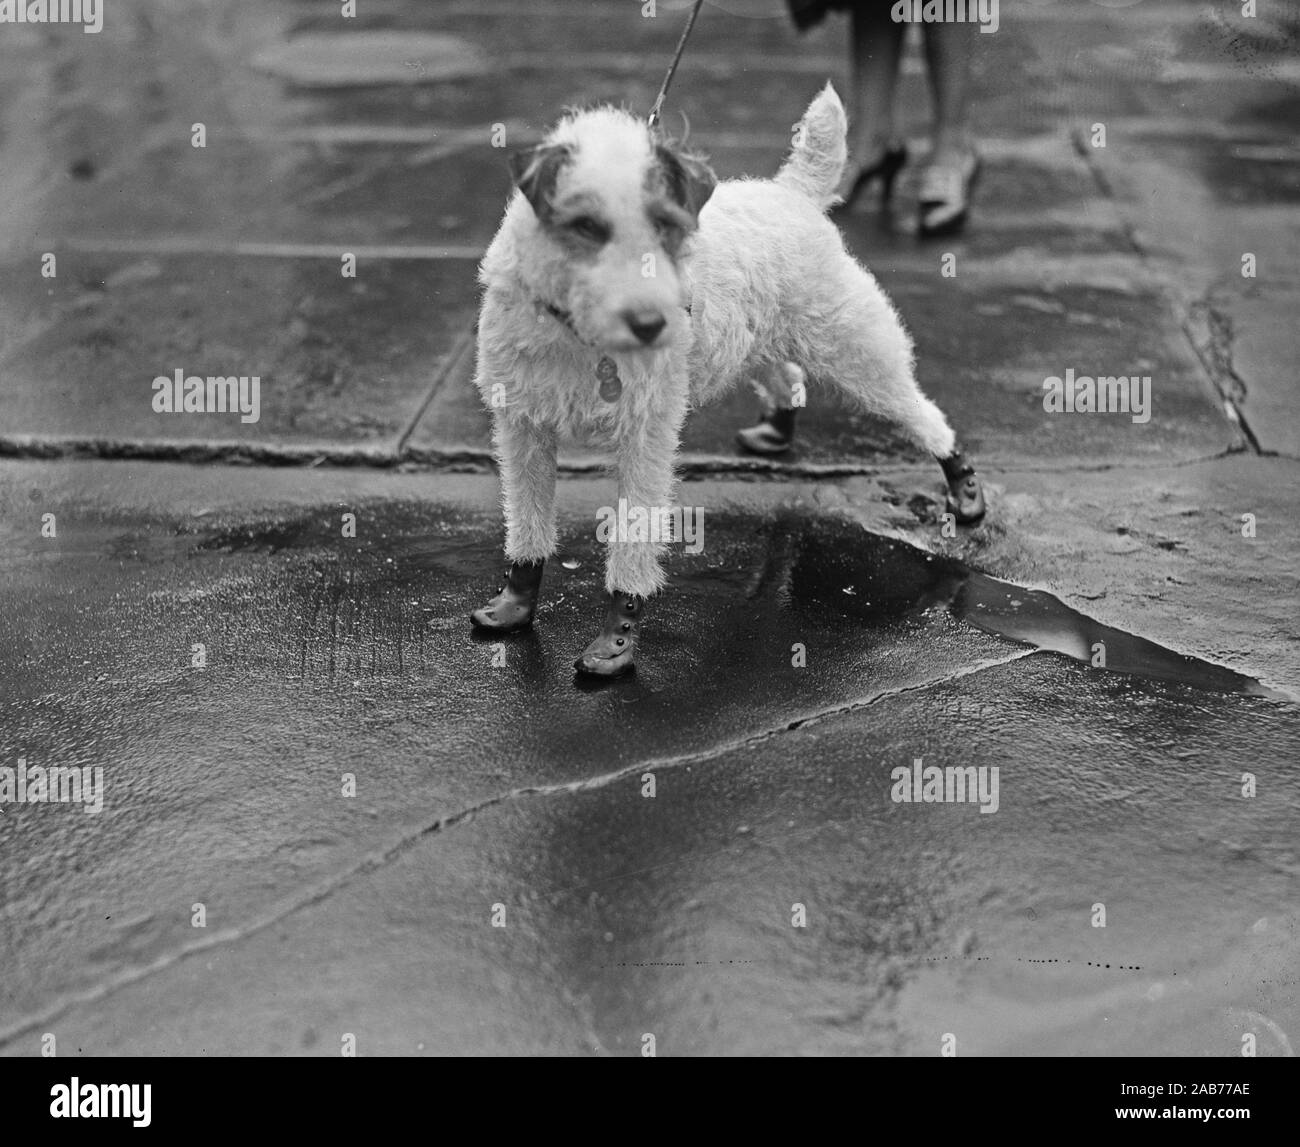 'Flapper goloshes' for the Pup, Peter Pan, wire-haired terrier ca. February 9, 1928 Stock Photo